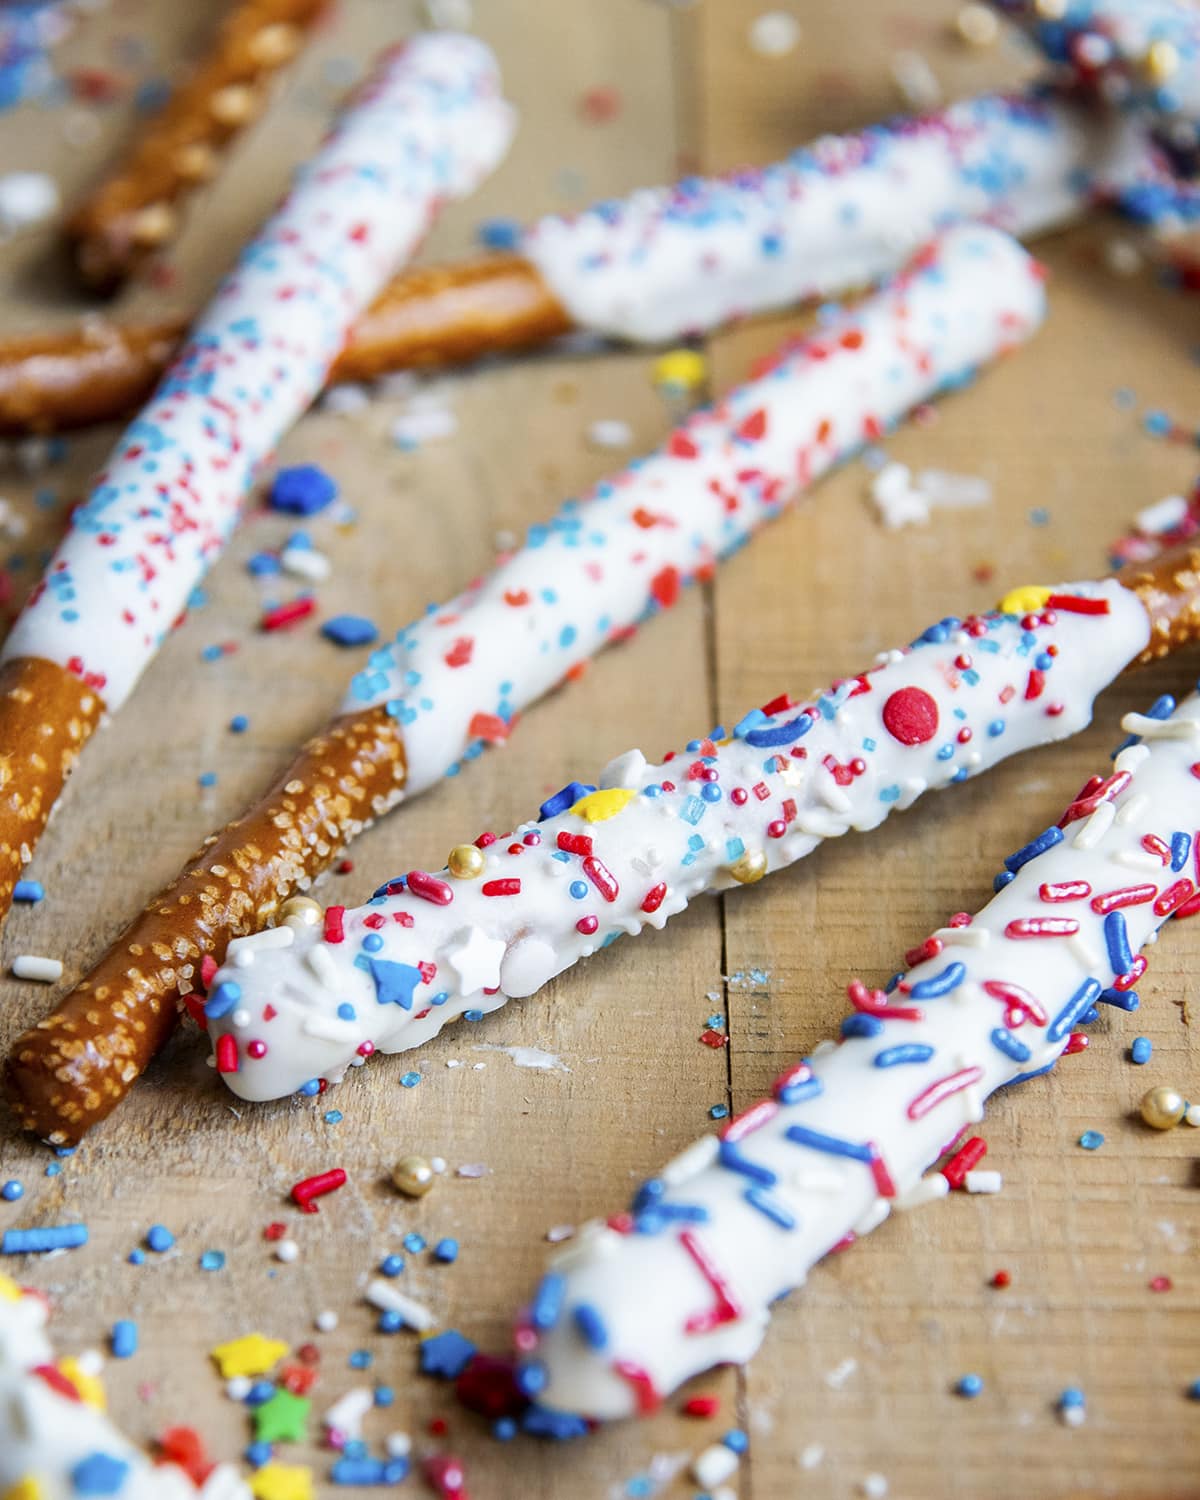 Pretzels dipped in white chocolate and topped with red, white, and blue, sprinkles.